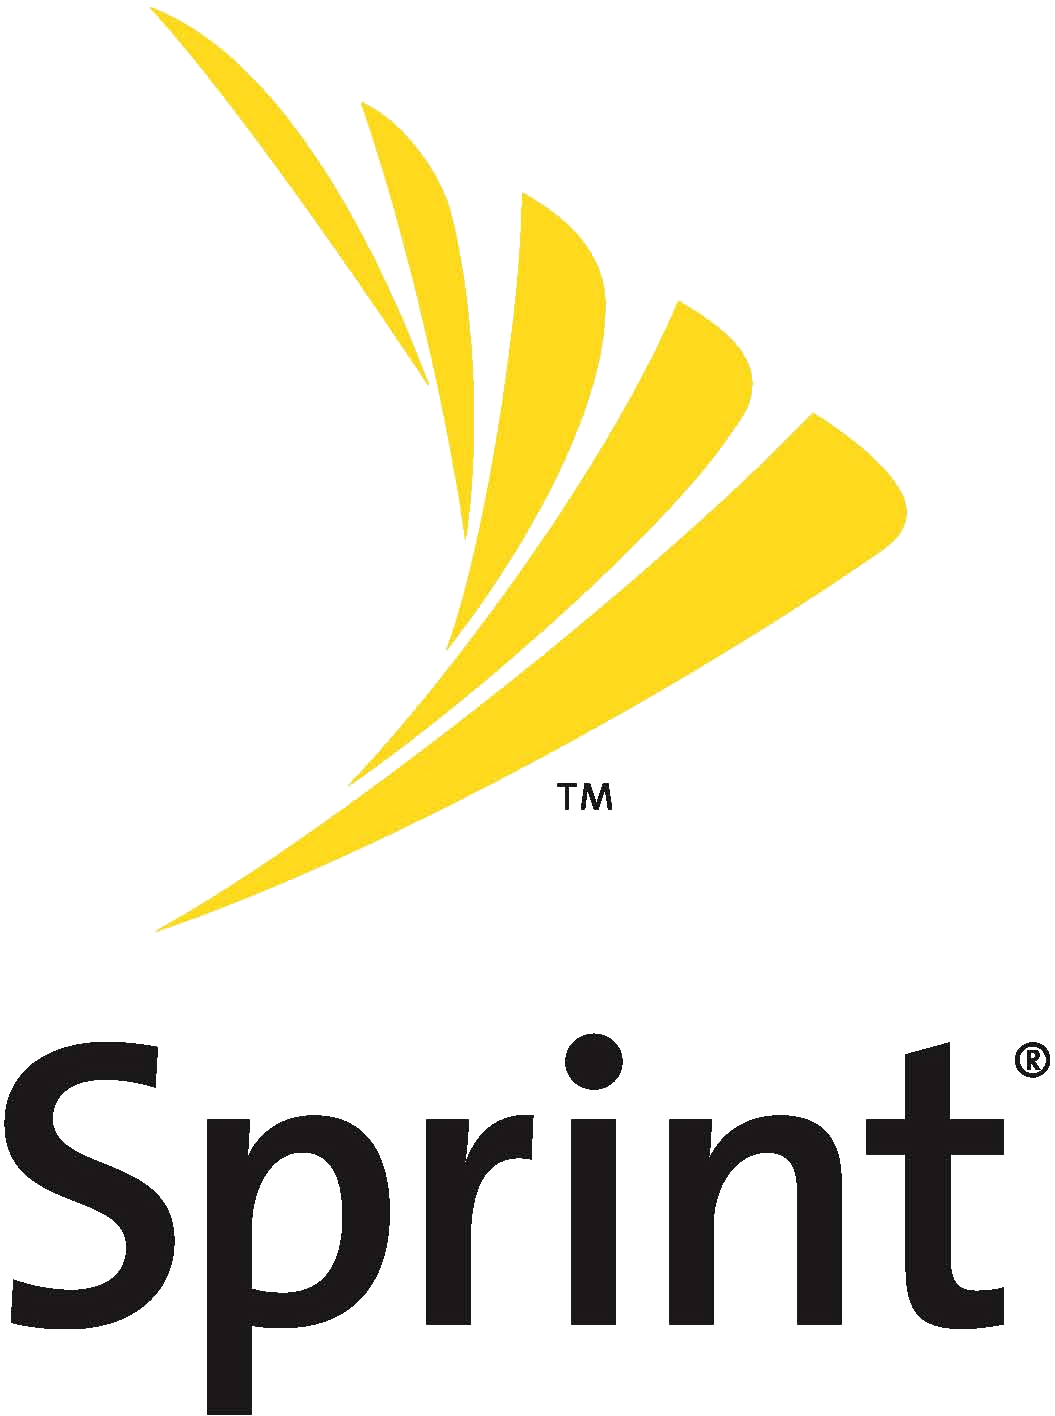 Sprint Charging Nextel iDEN Users Additional $10 Per Month in January